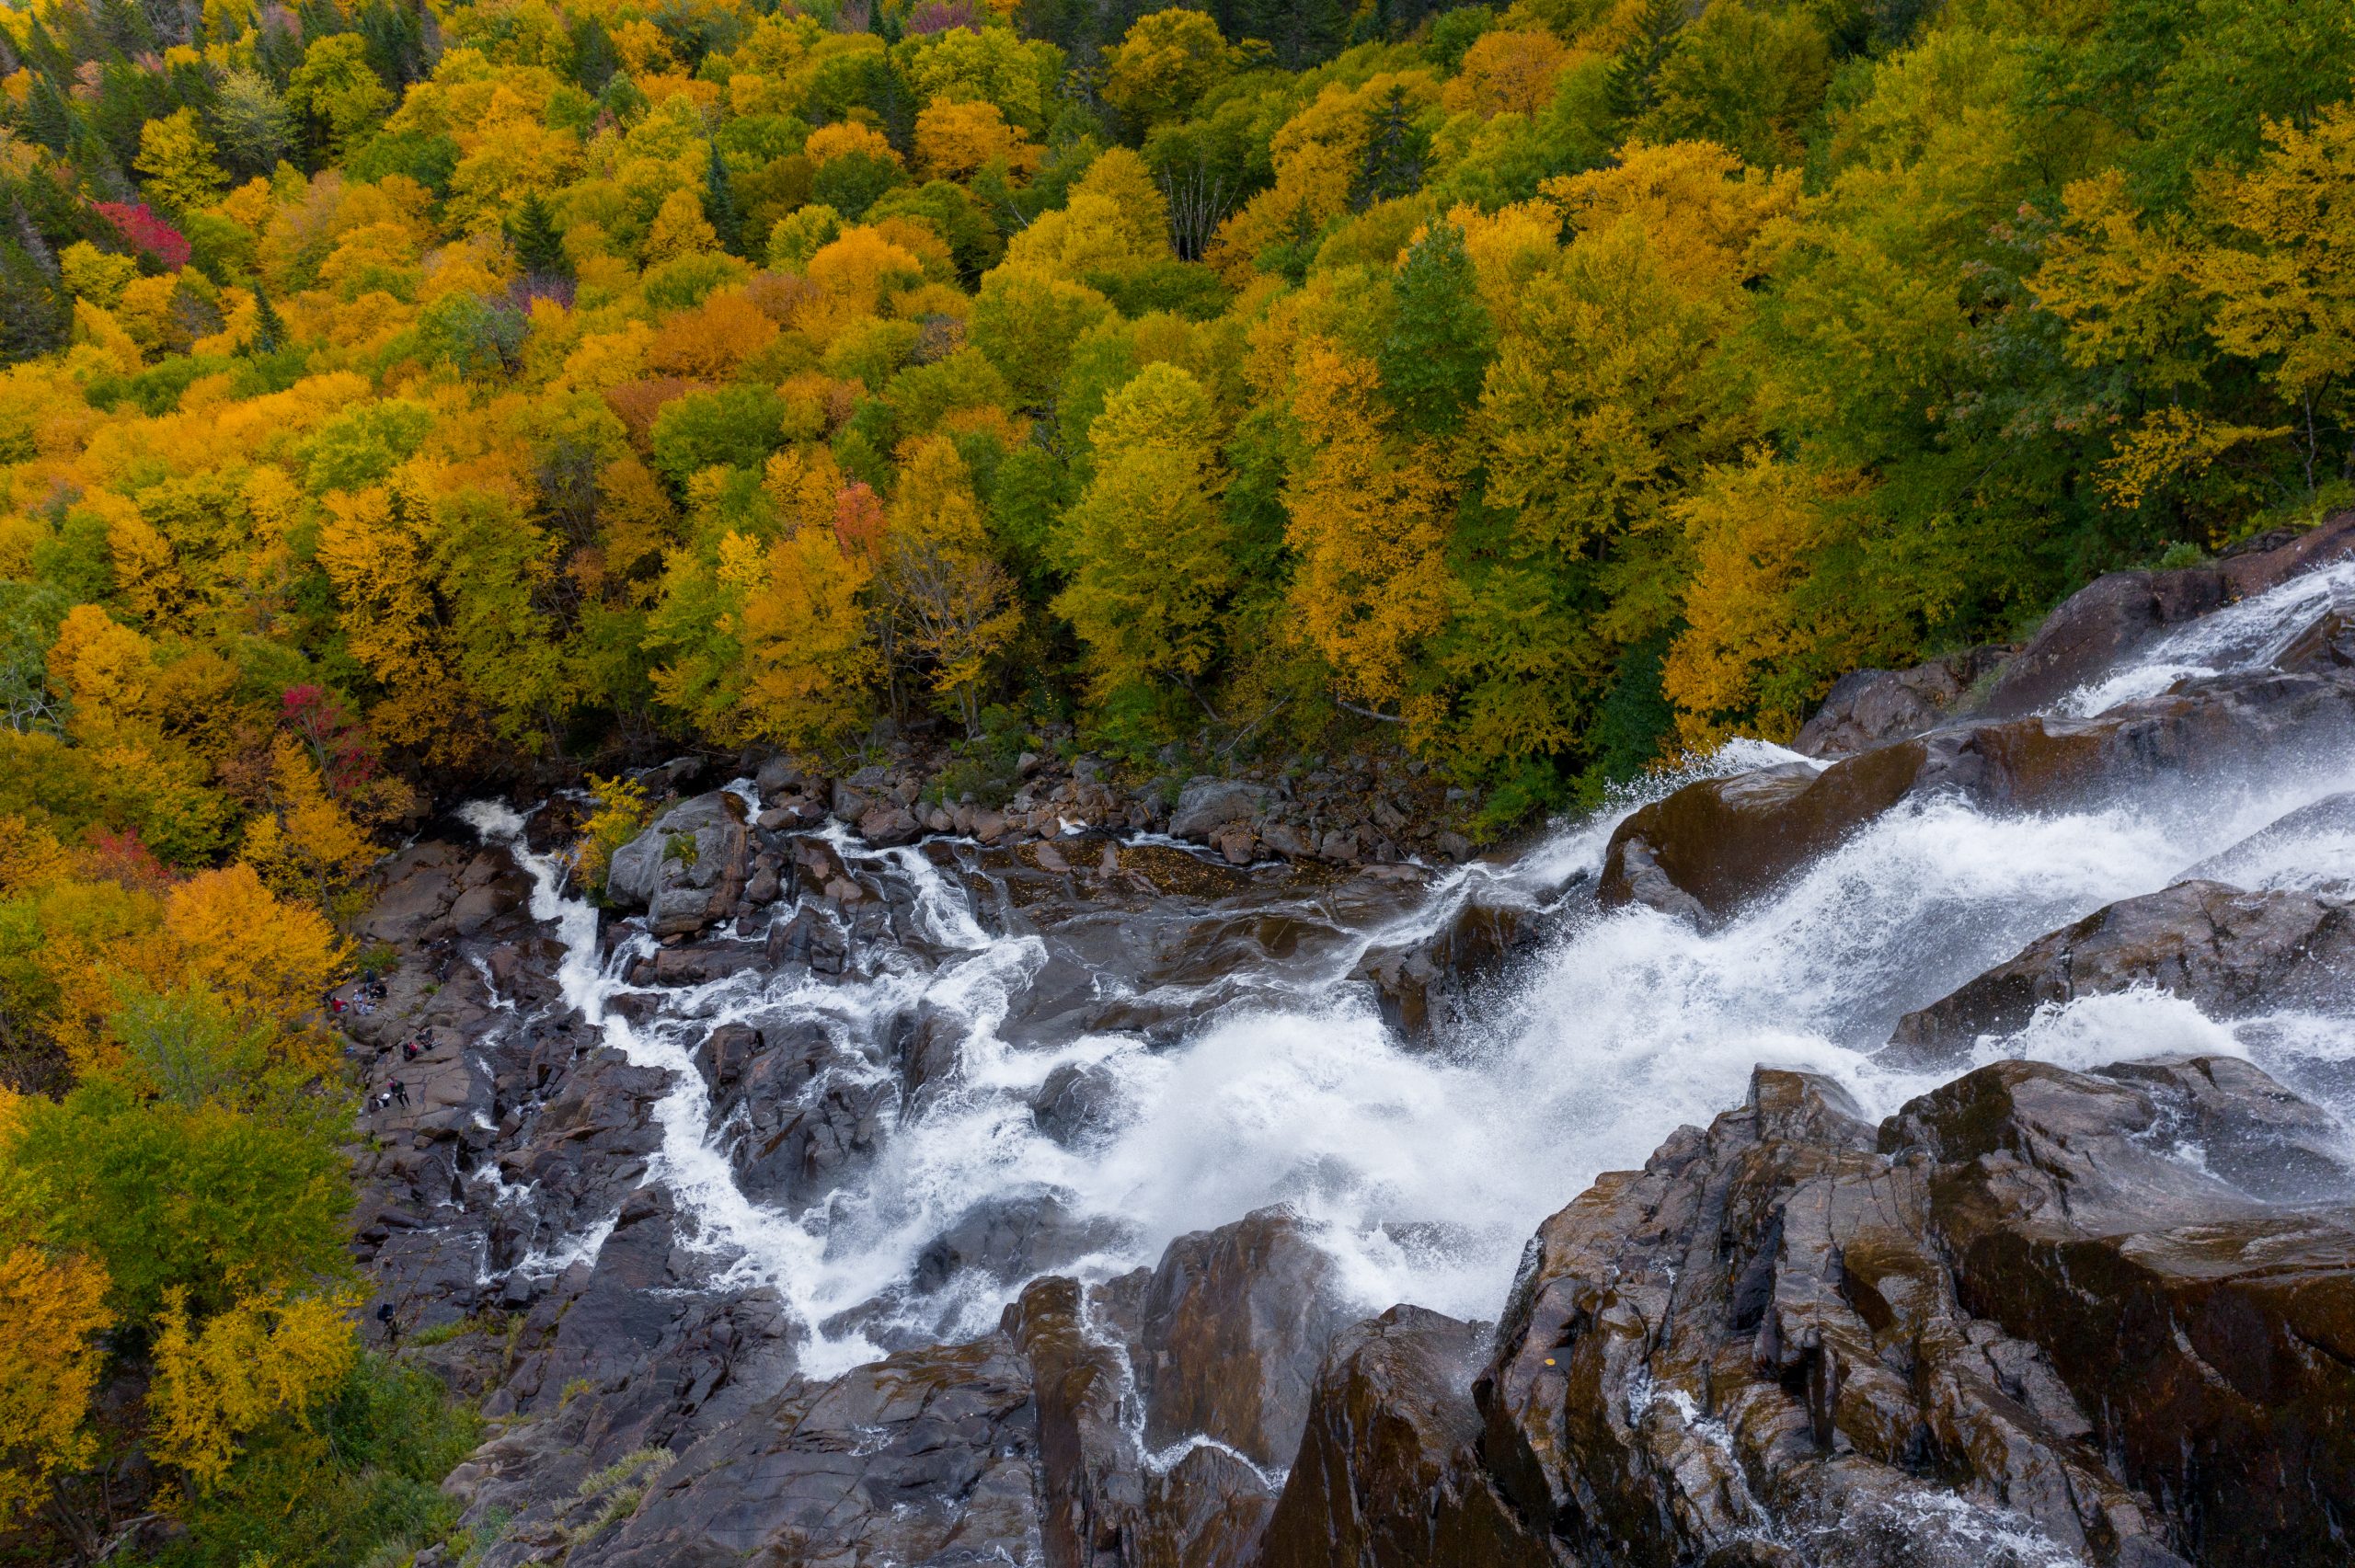 Photo of Delaney Falls in autumn, a rock waterfall surrounded by trees and the lush greenery of the Valley, visible from the hiking trails.